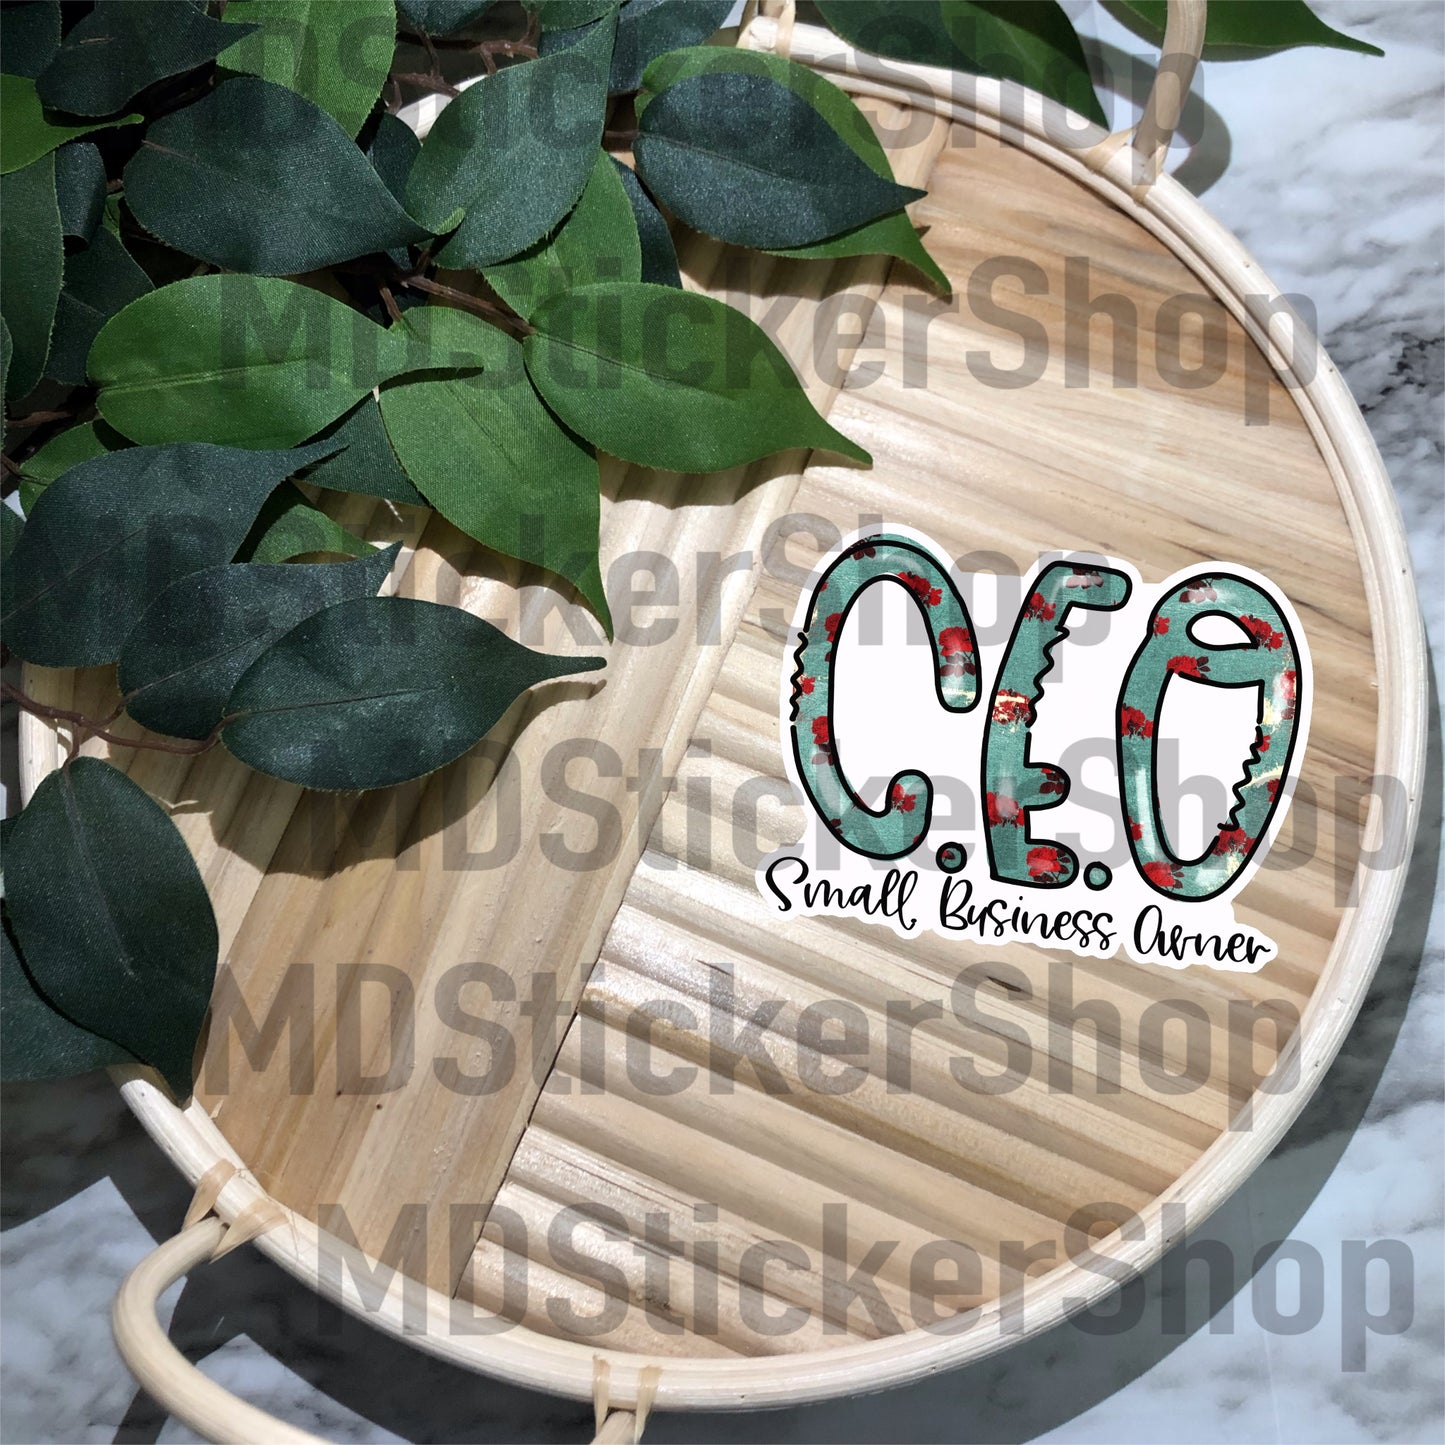 CEO Small Business Owner Vinyl Sticker